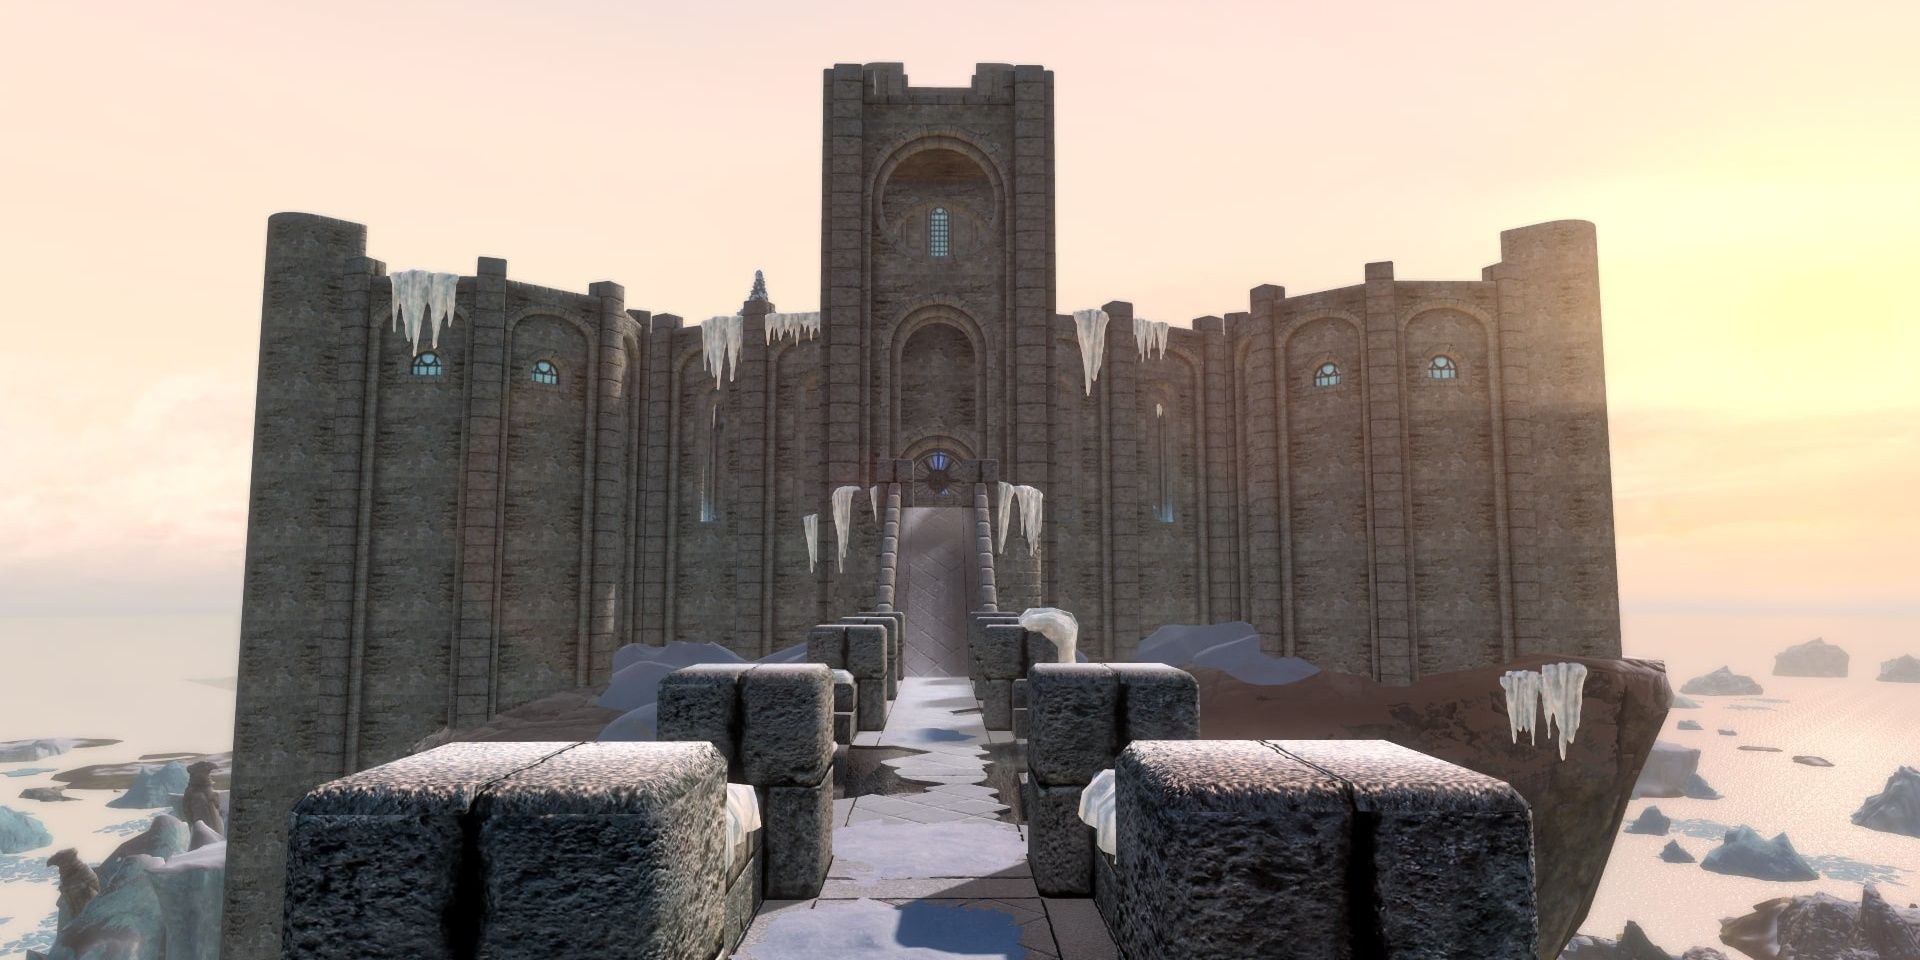 The sun sets behind the College of Winterhold in Skyrim.